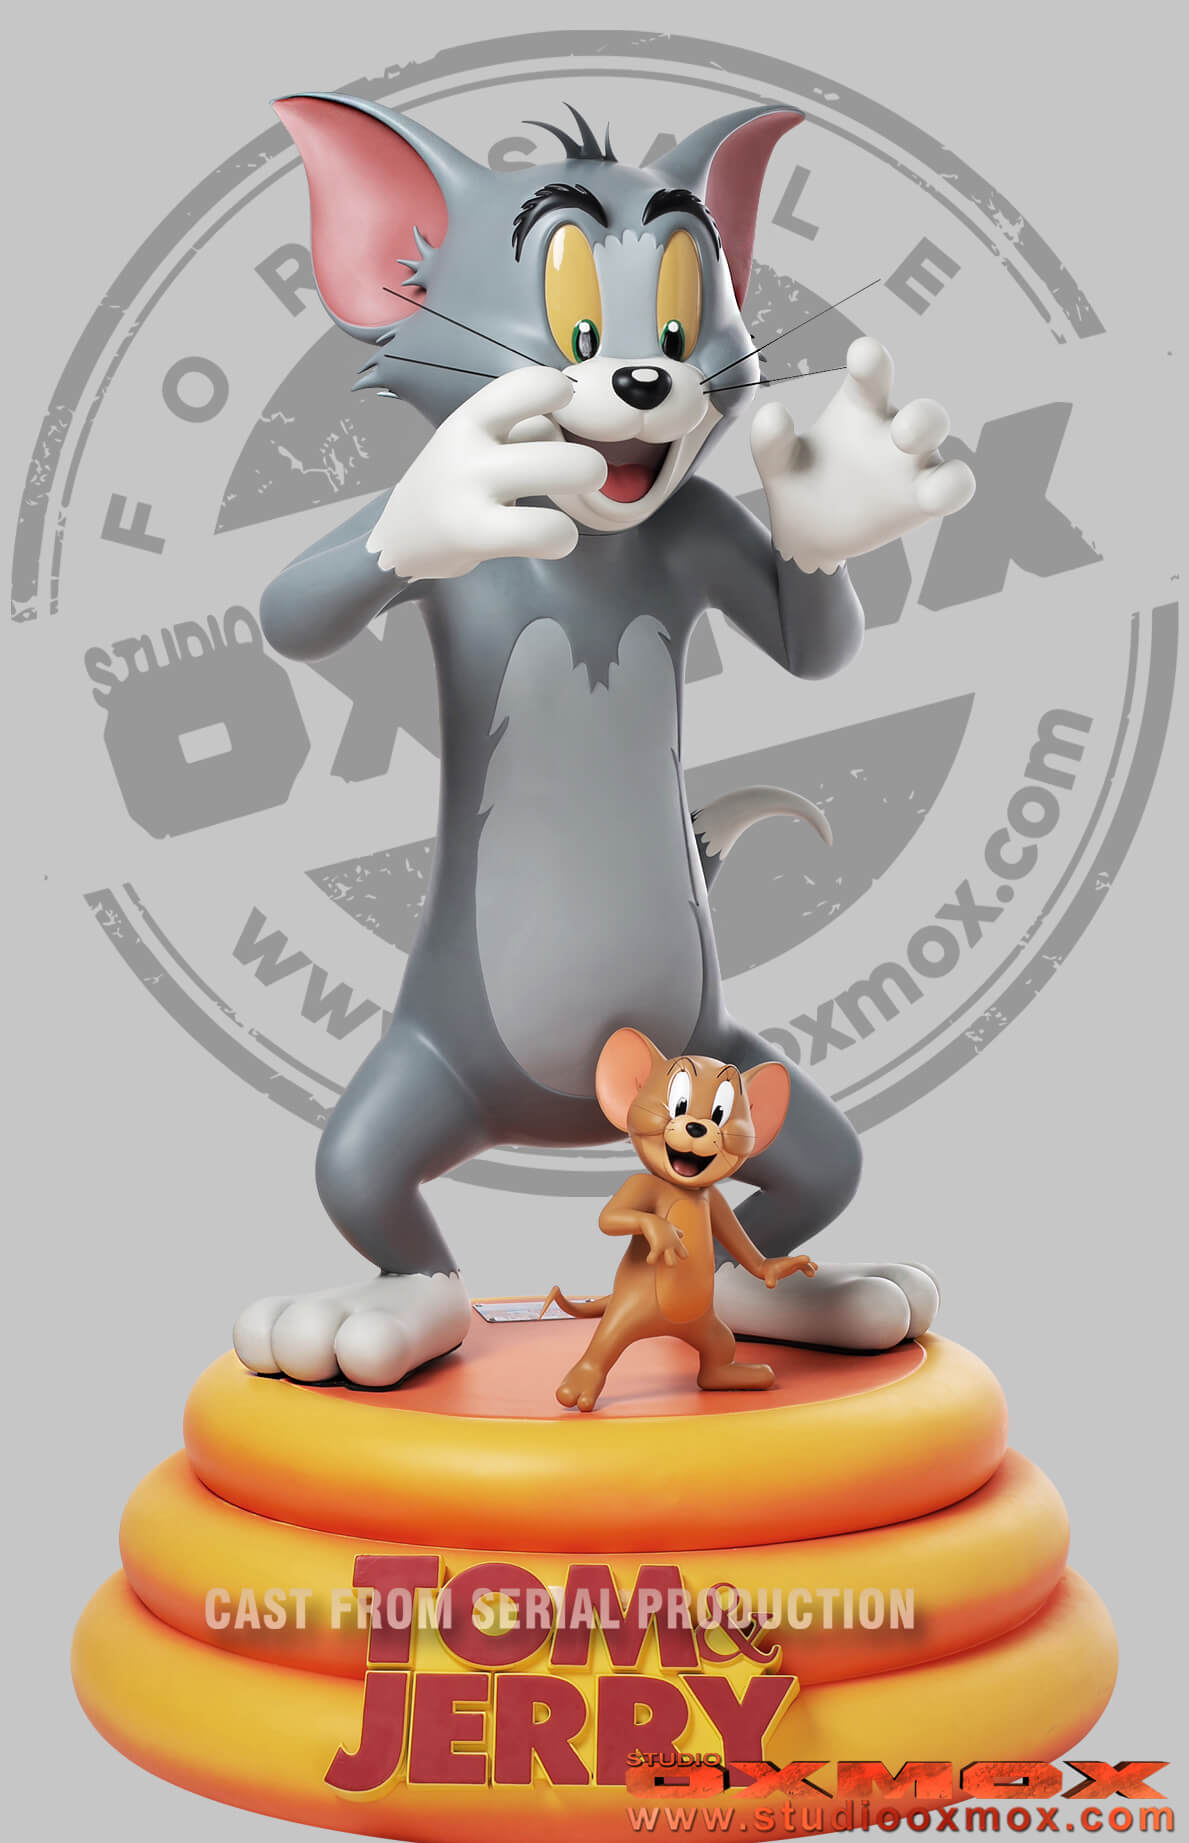 Tom and Jerry life size statues, Looney Tunes